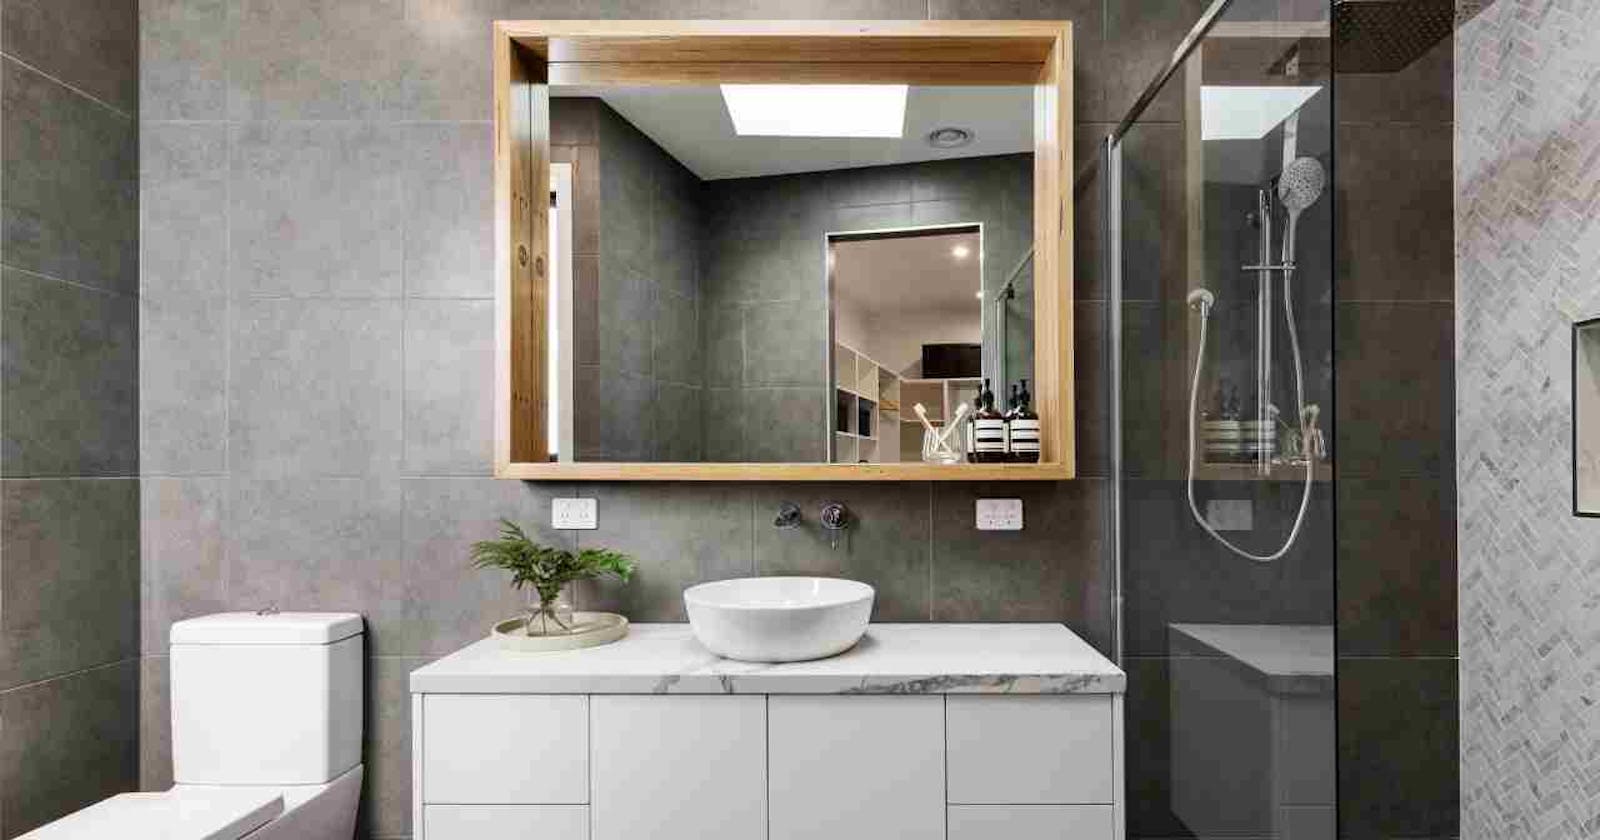 How to Customize Your Bathroom Vanity on a Budget